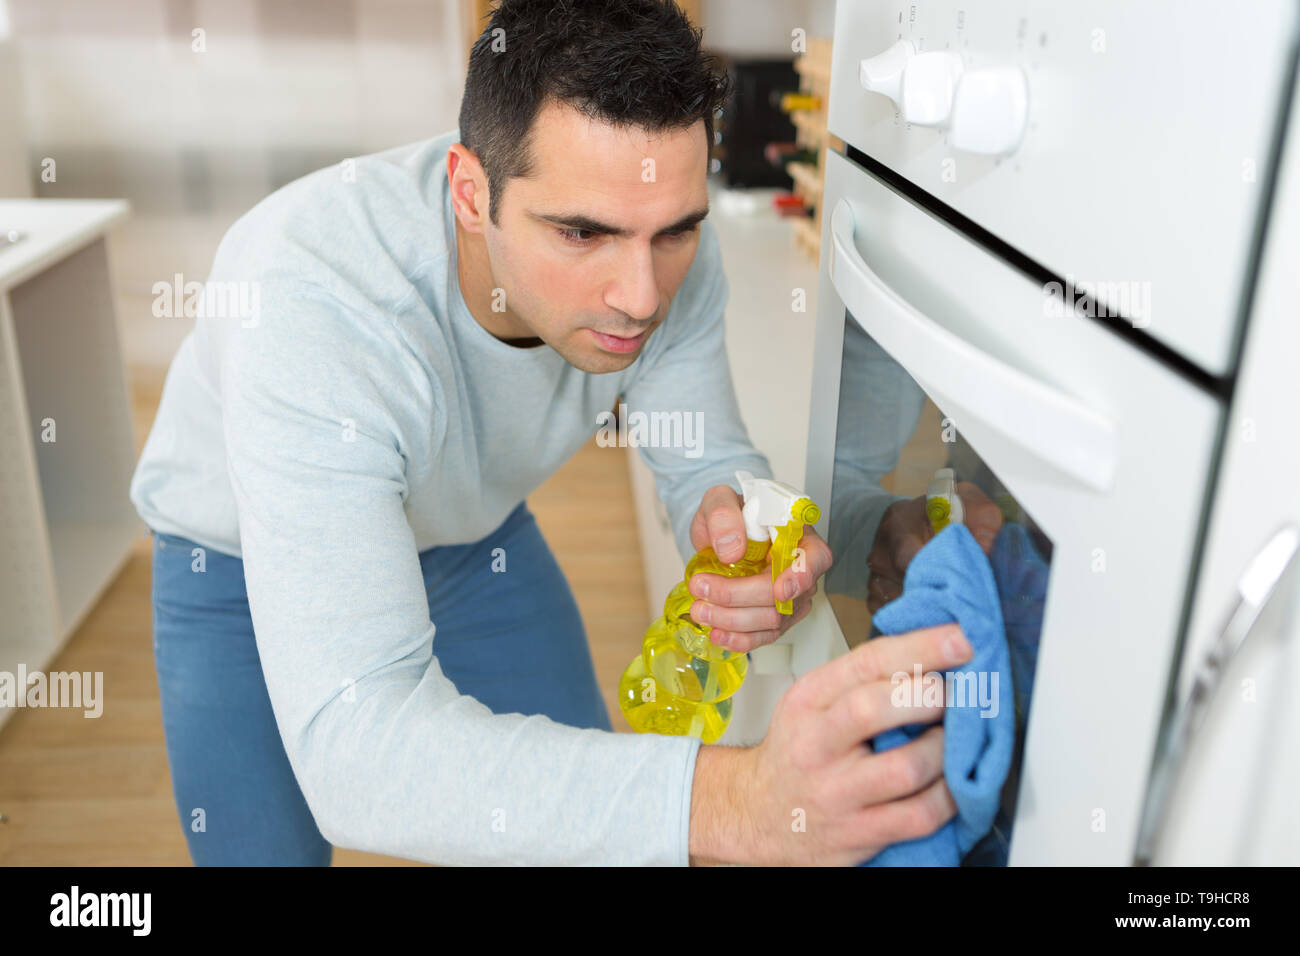 man earnestly cleaning oven in home Stock Photo